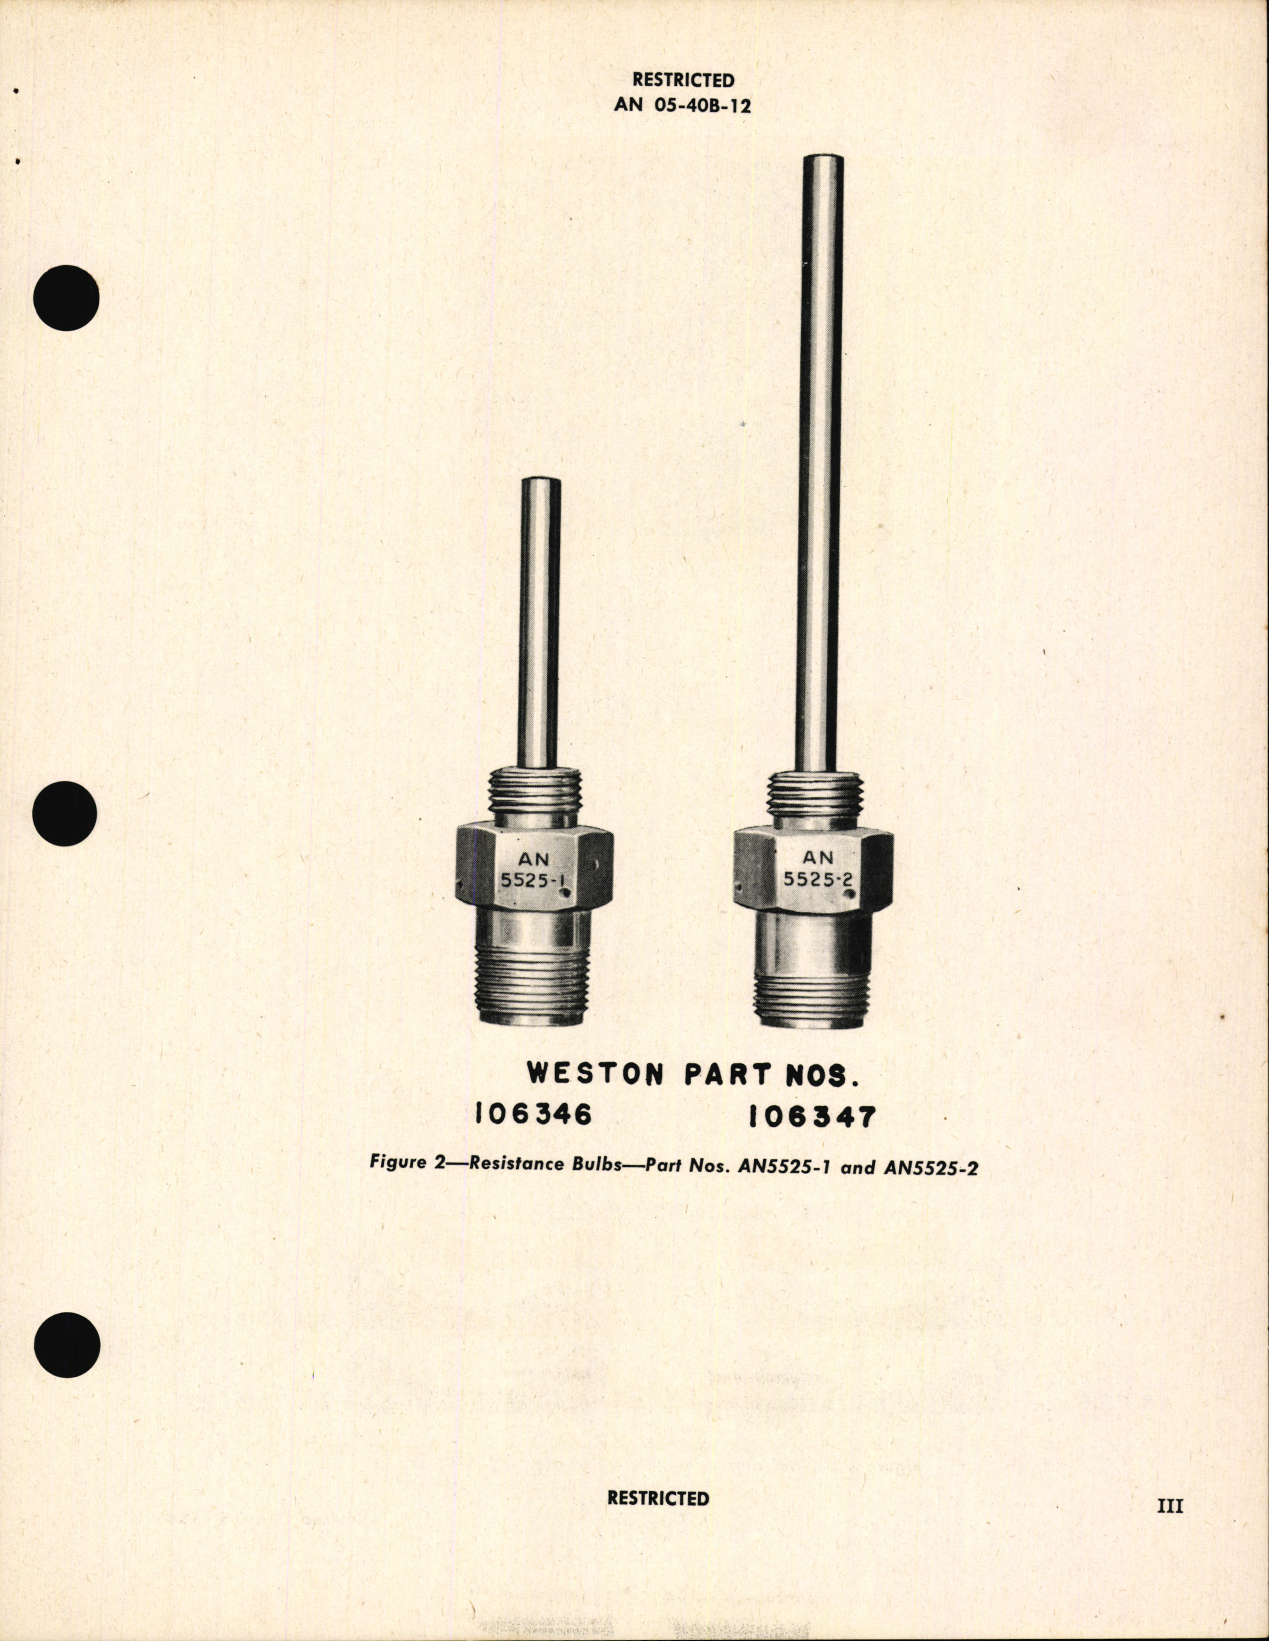 Sample page 5 from AirCorps Library document: Handbook of Instructions with Parts Catalog for Thermometer Indicators